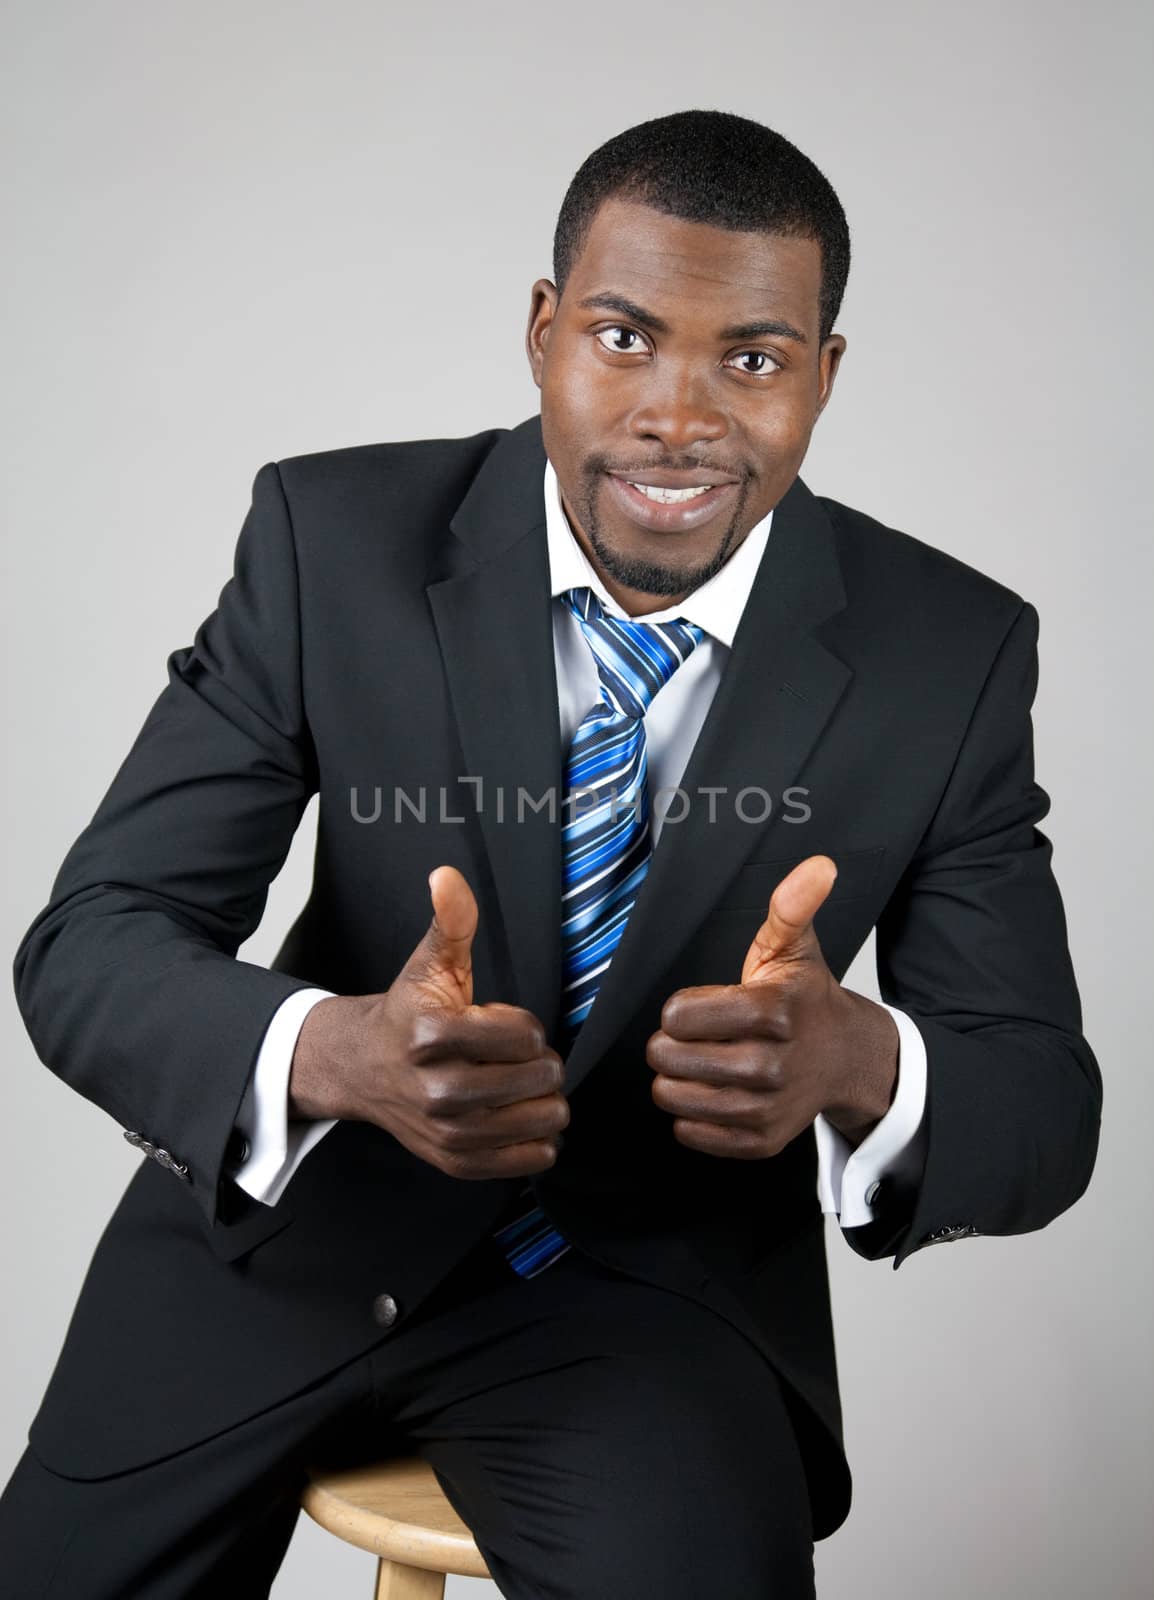 Smiling successful African American businessman with thumbs up.